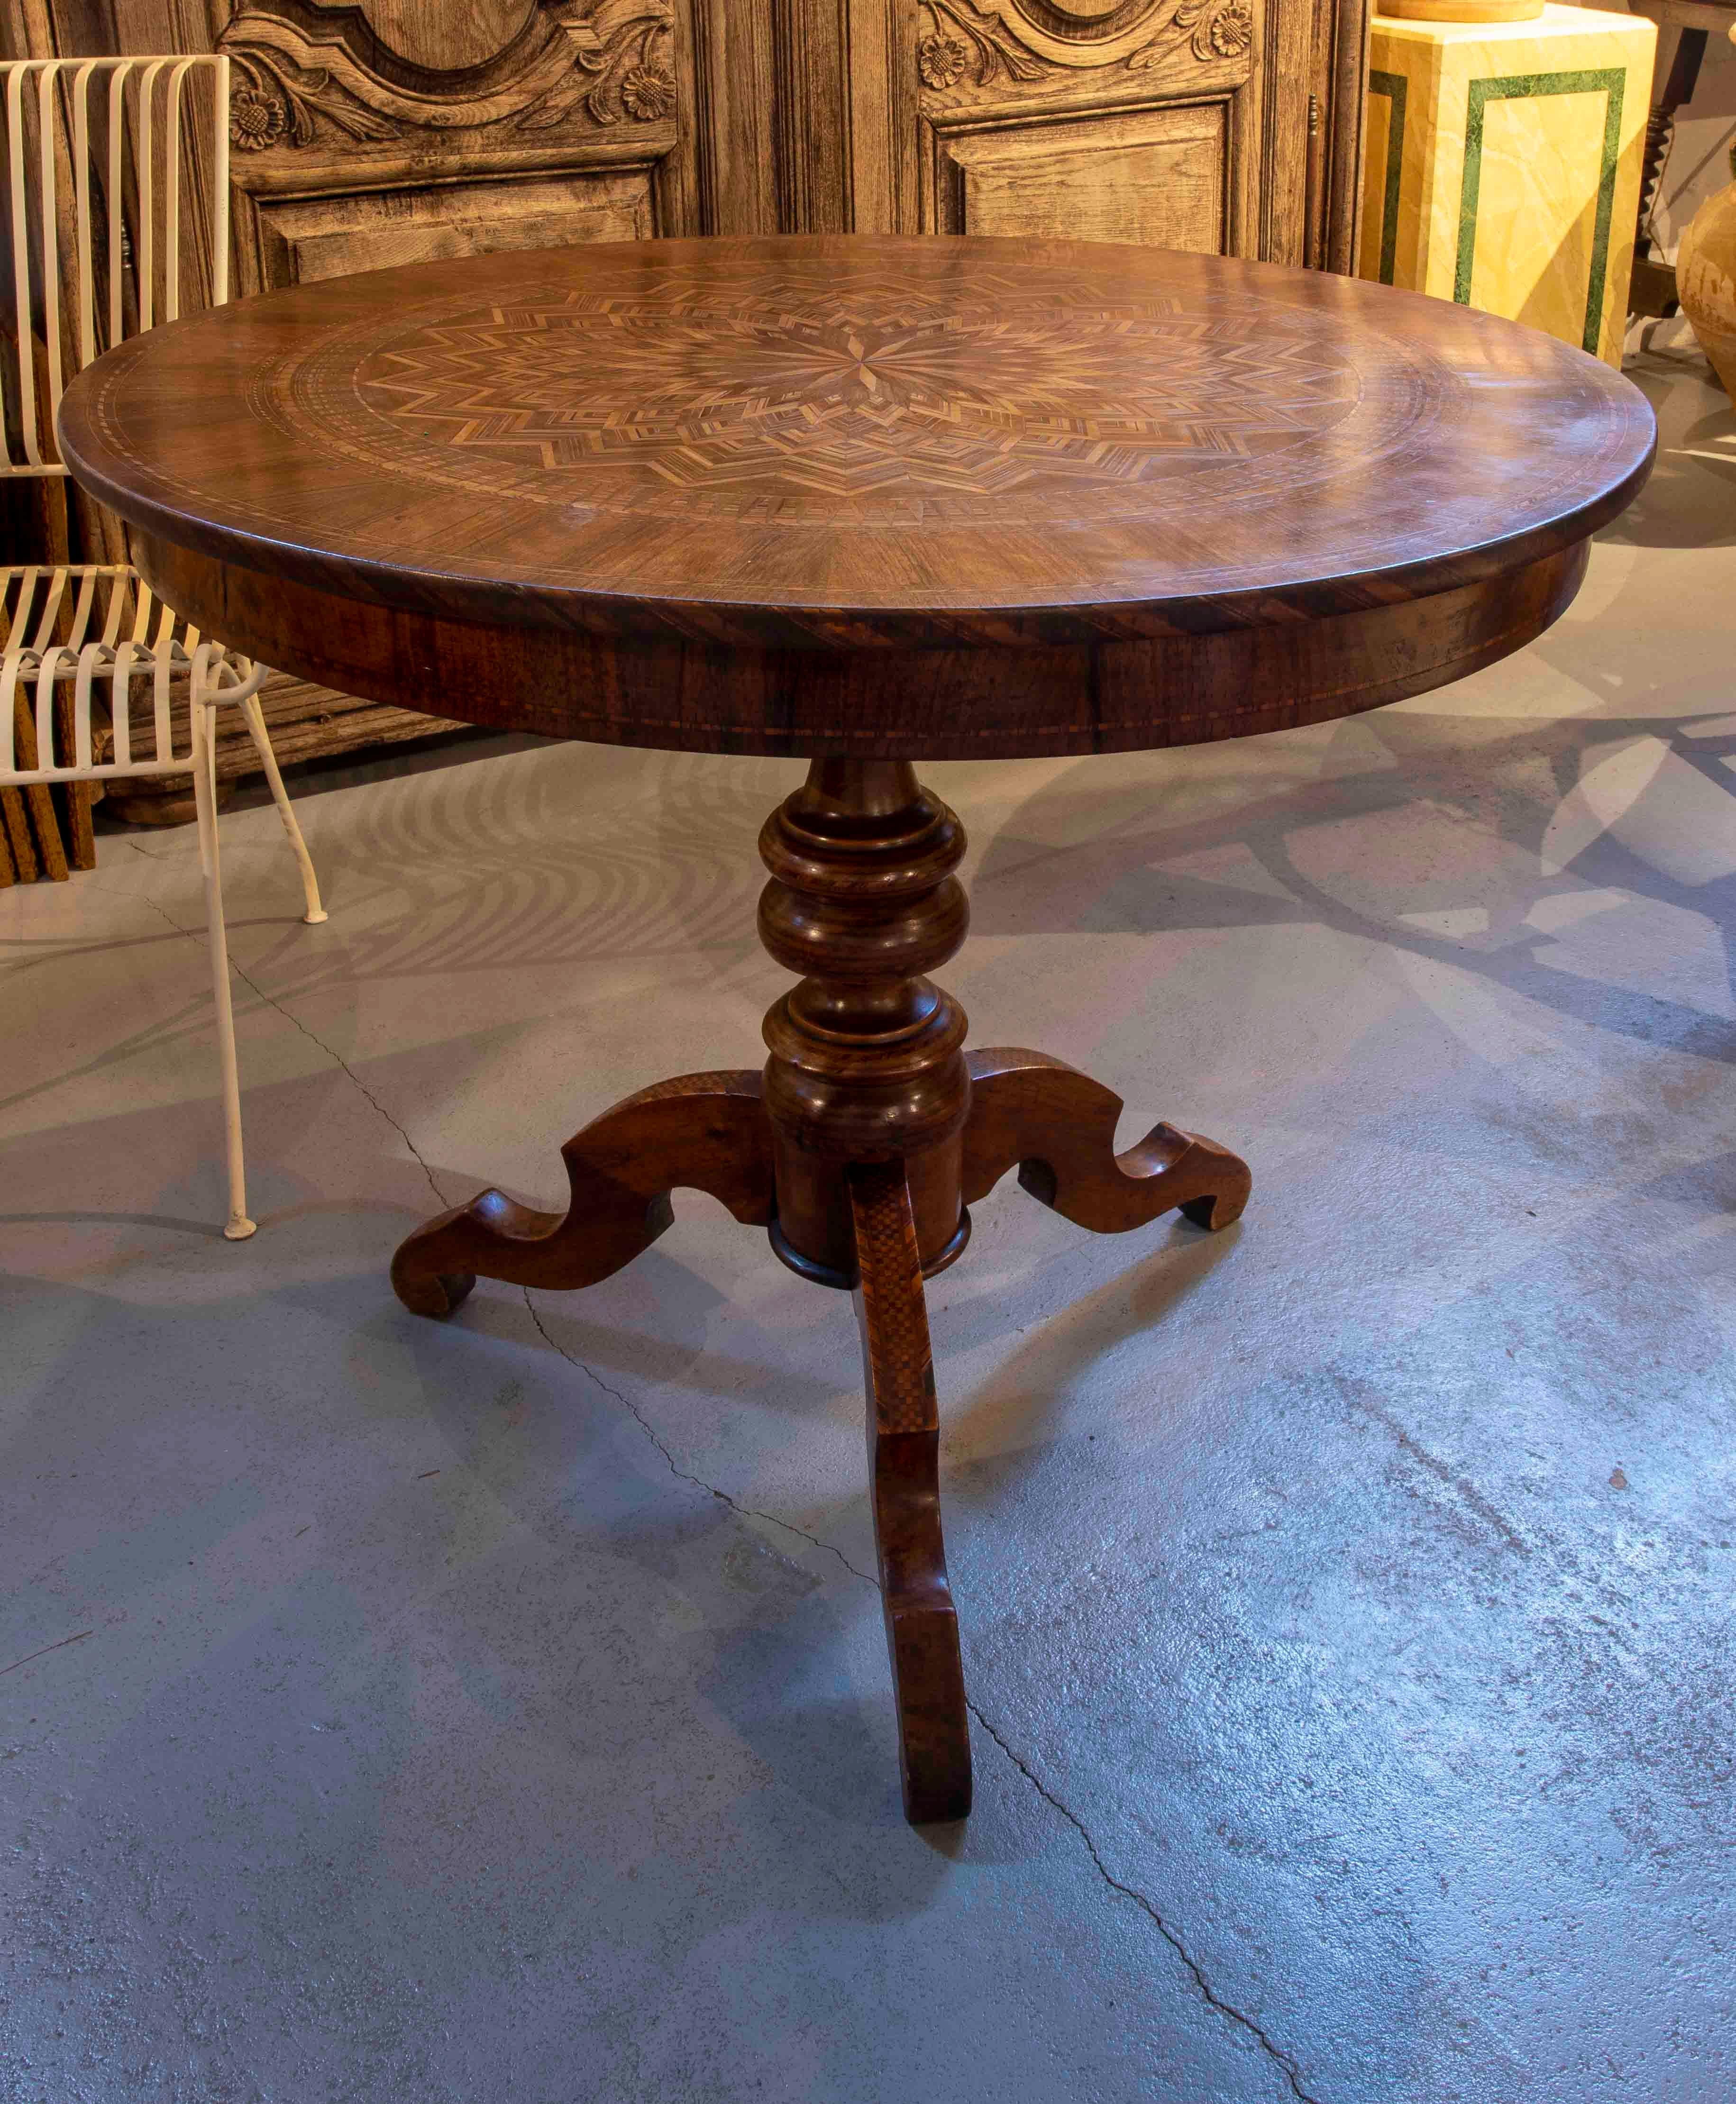 Spanish 19th Century Round Wooden Table with Inlaid Table Top and Legs For Sale